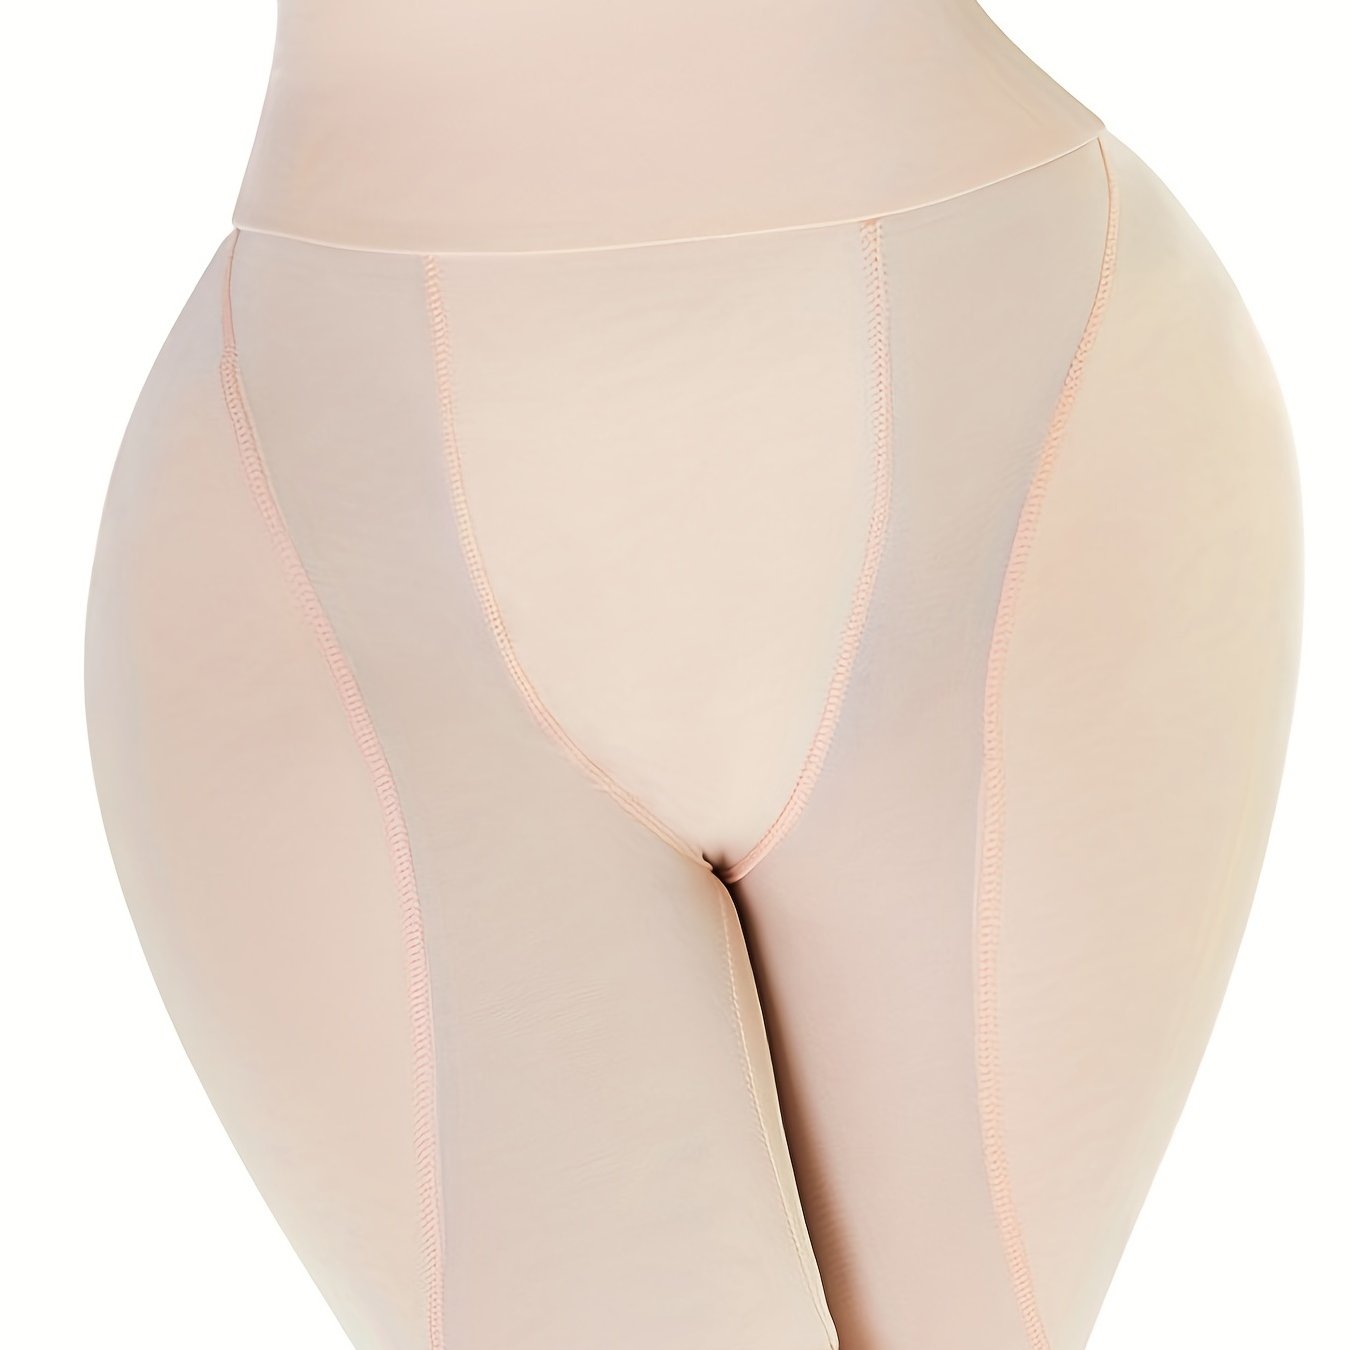 High Waist Seamless Tummy Control Panties With Hip Padding For Women  Compression Thigh Slimmer Hip Enhancer Shapewear From Dang09, $21.3